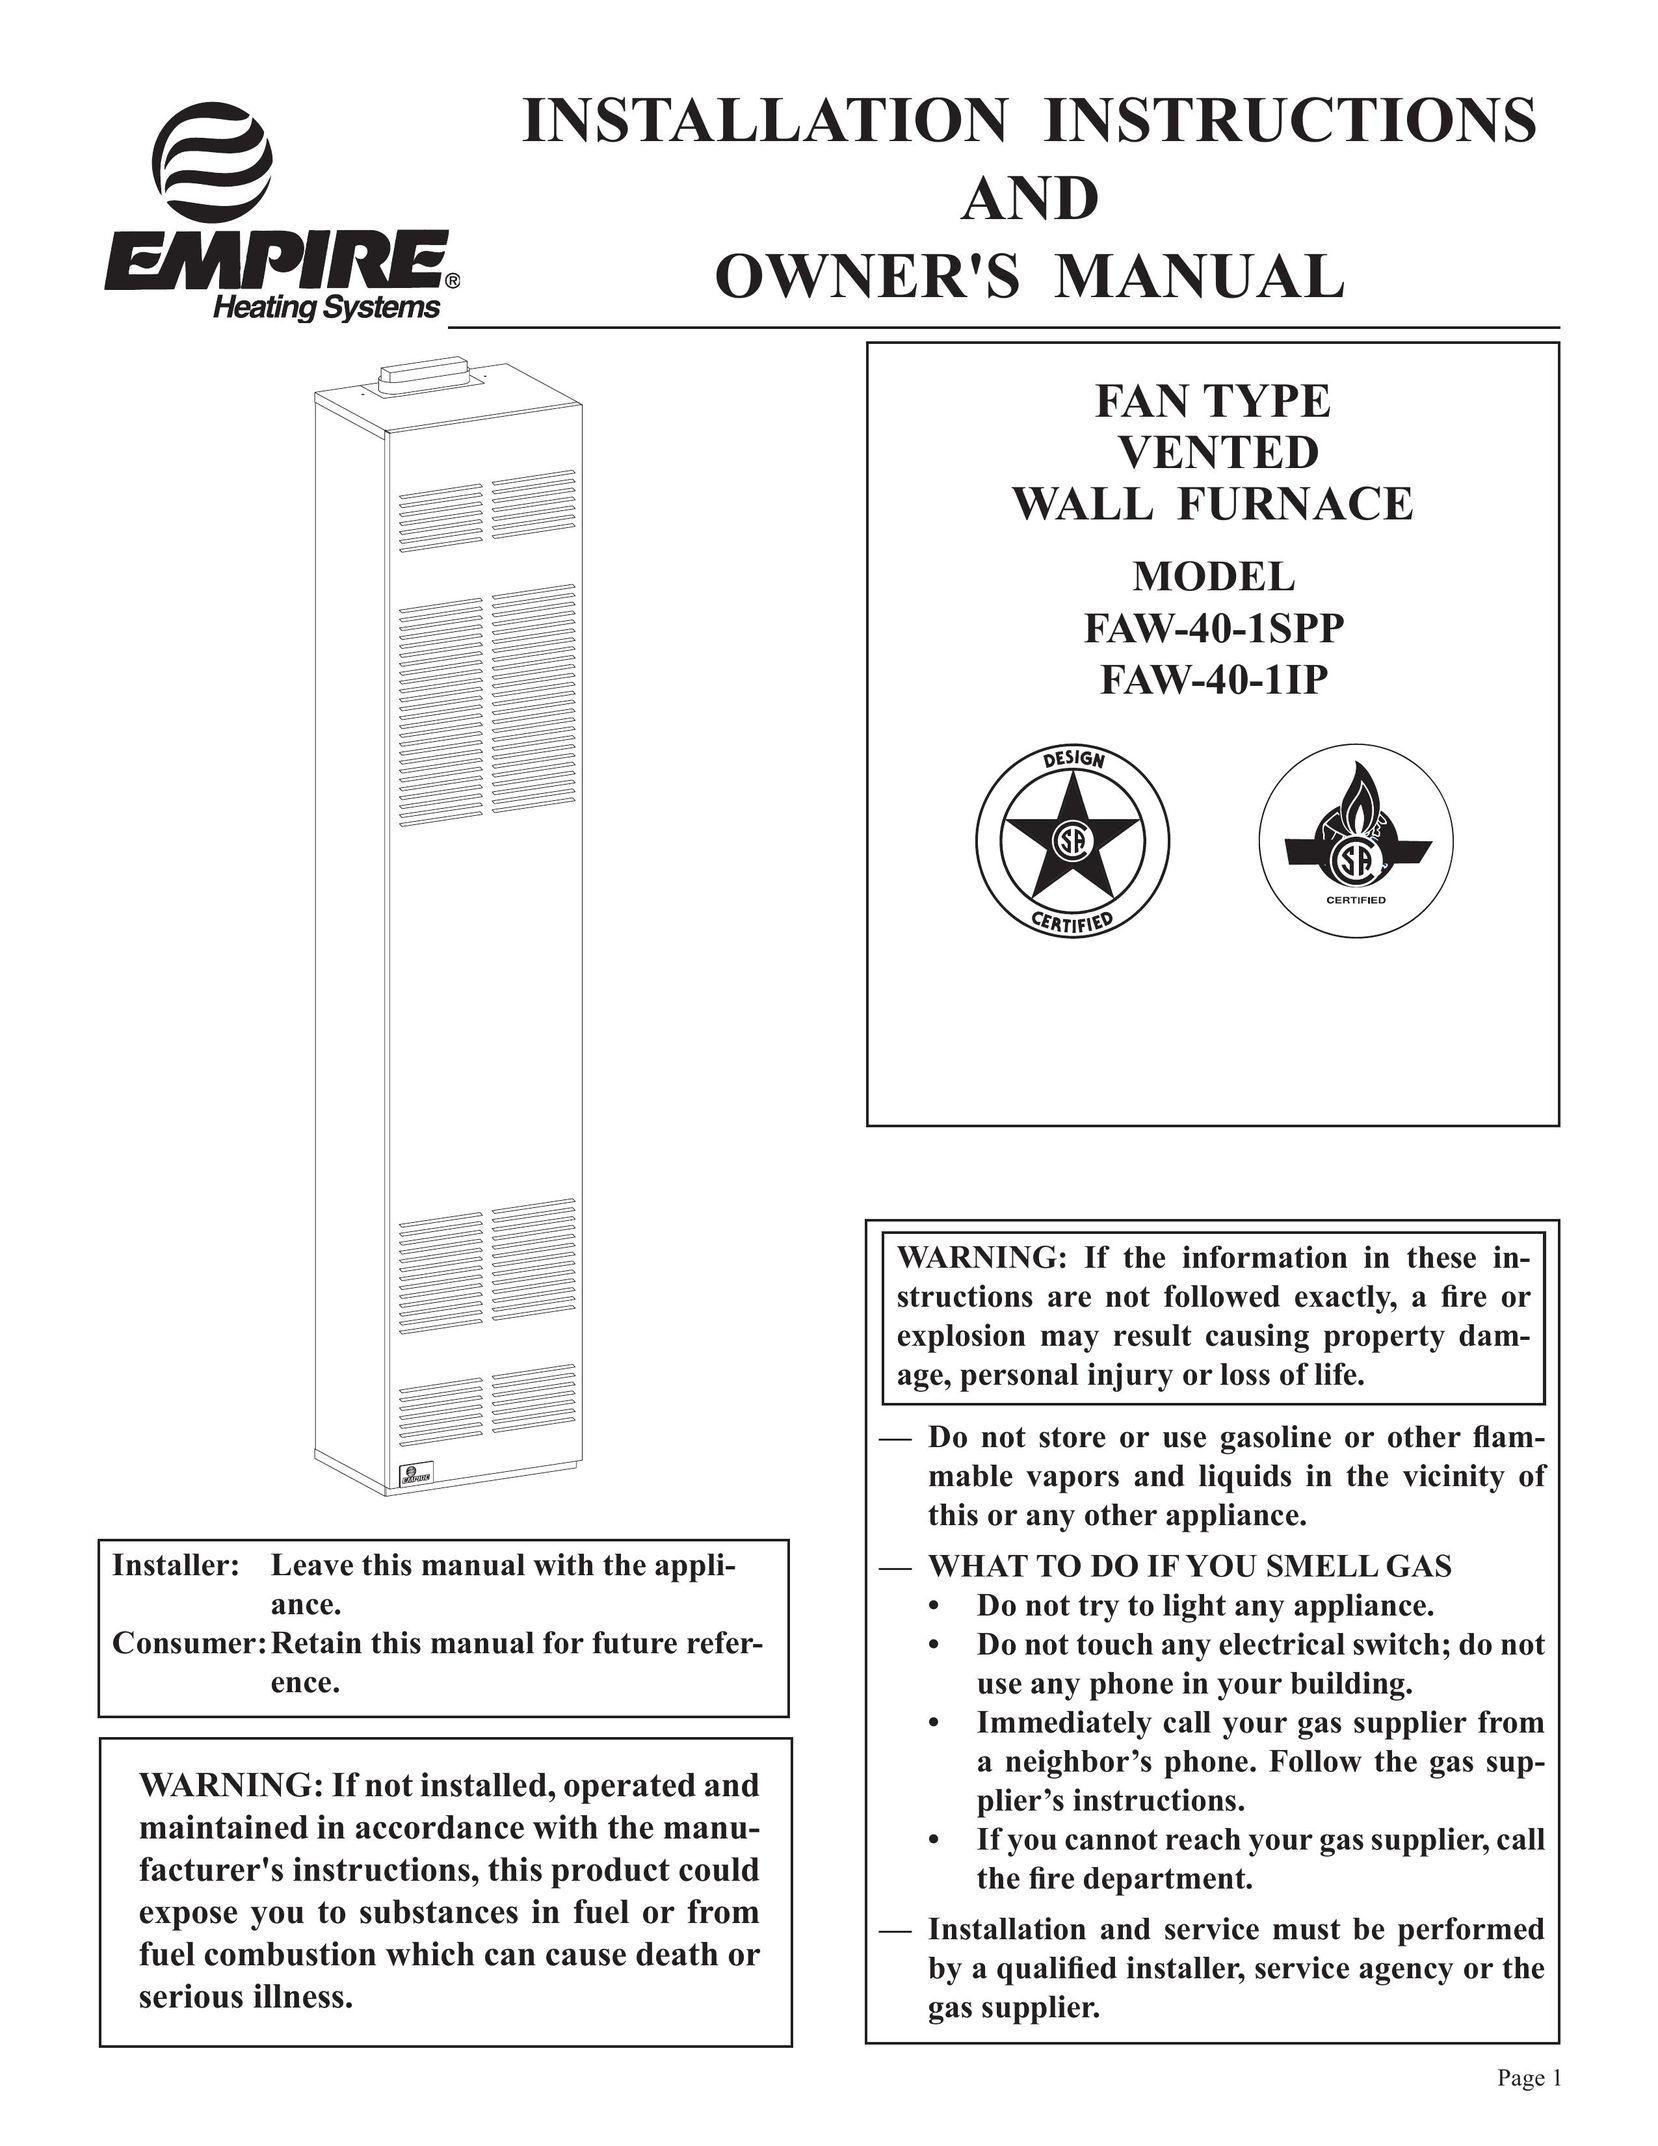 Empire Comfort Systems FAW-40-1IP Furnace User Manual